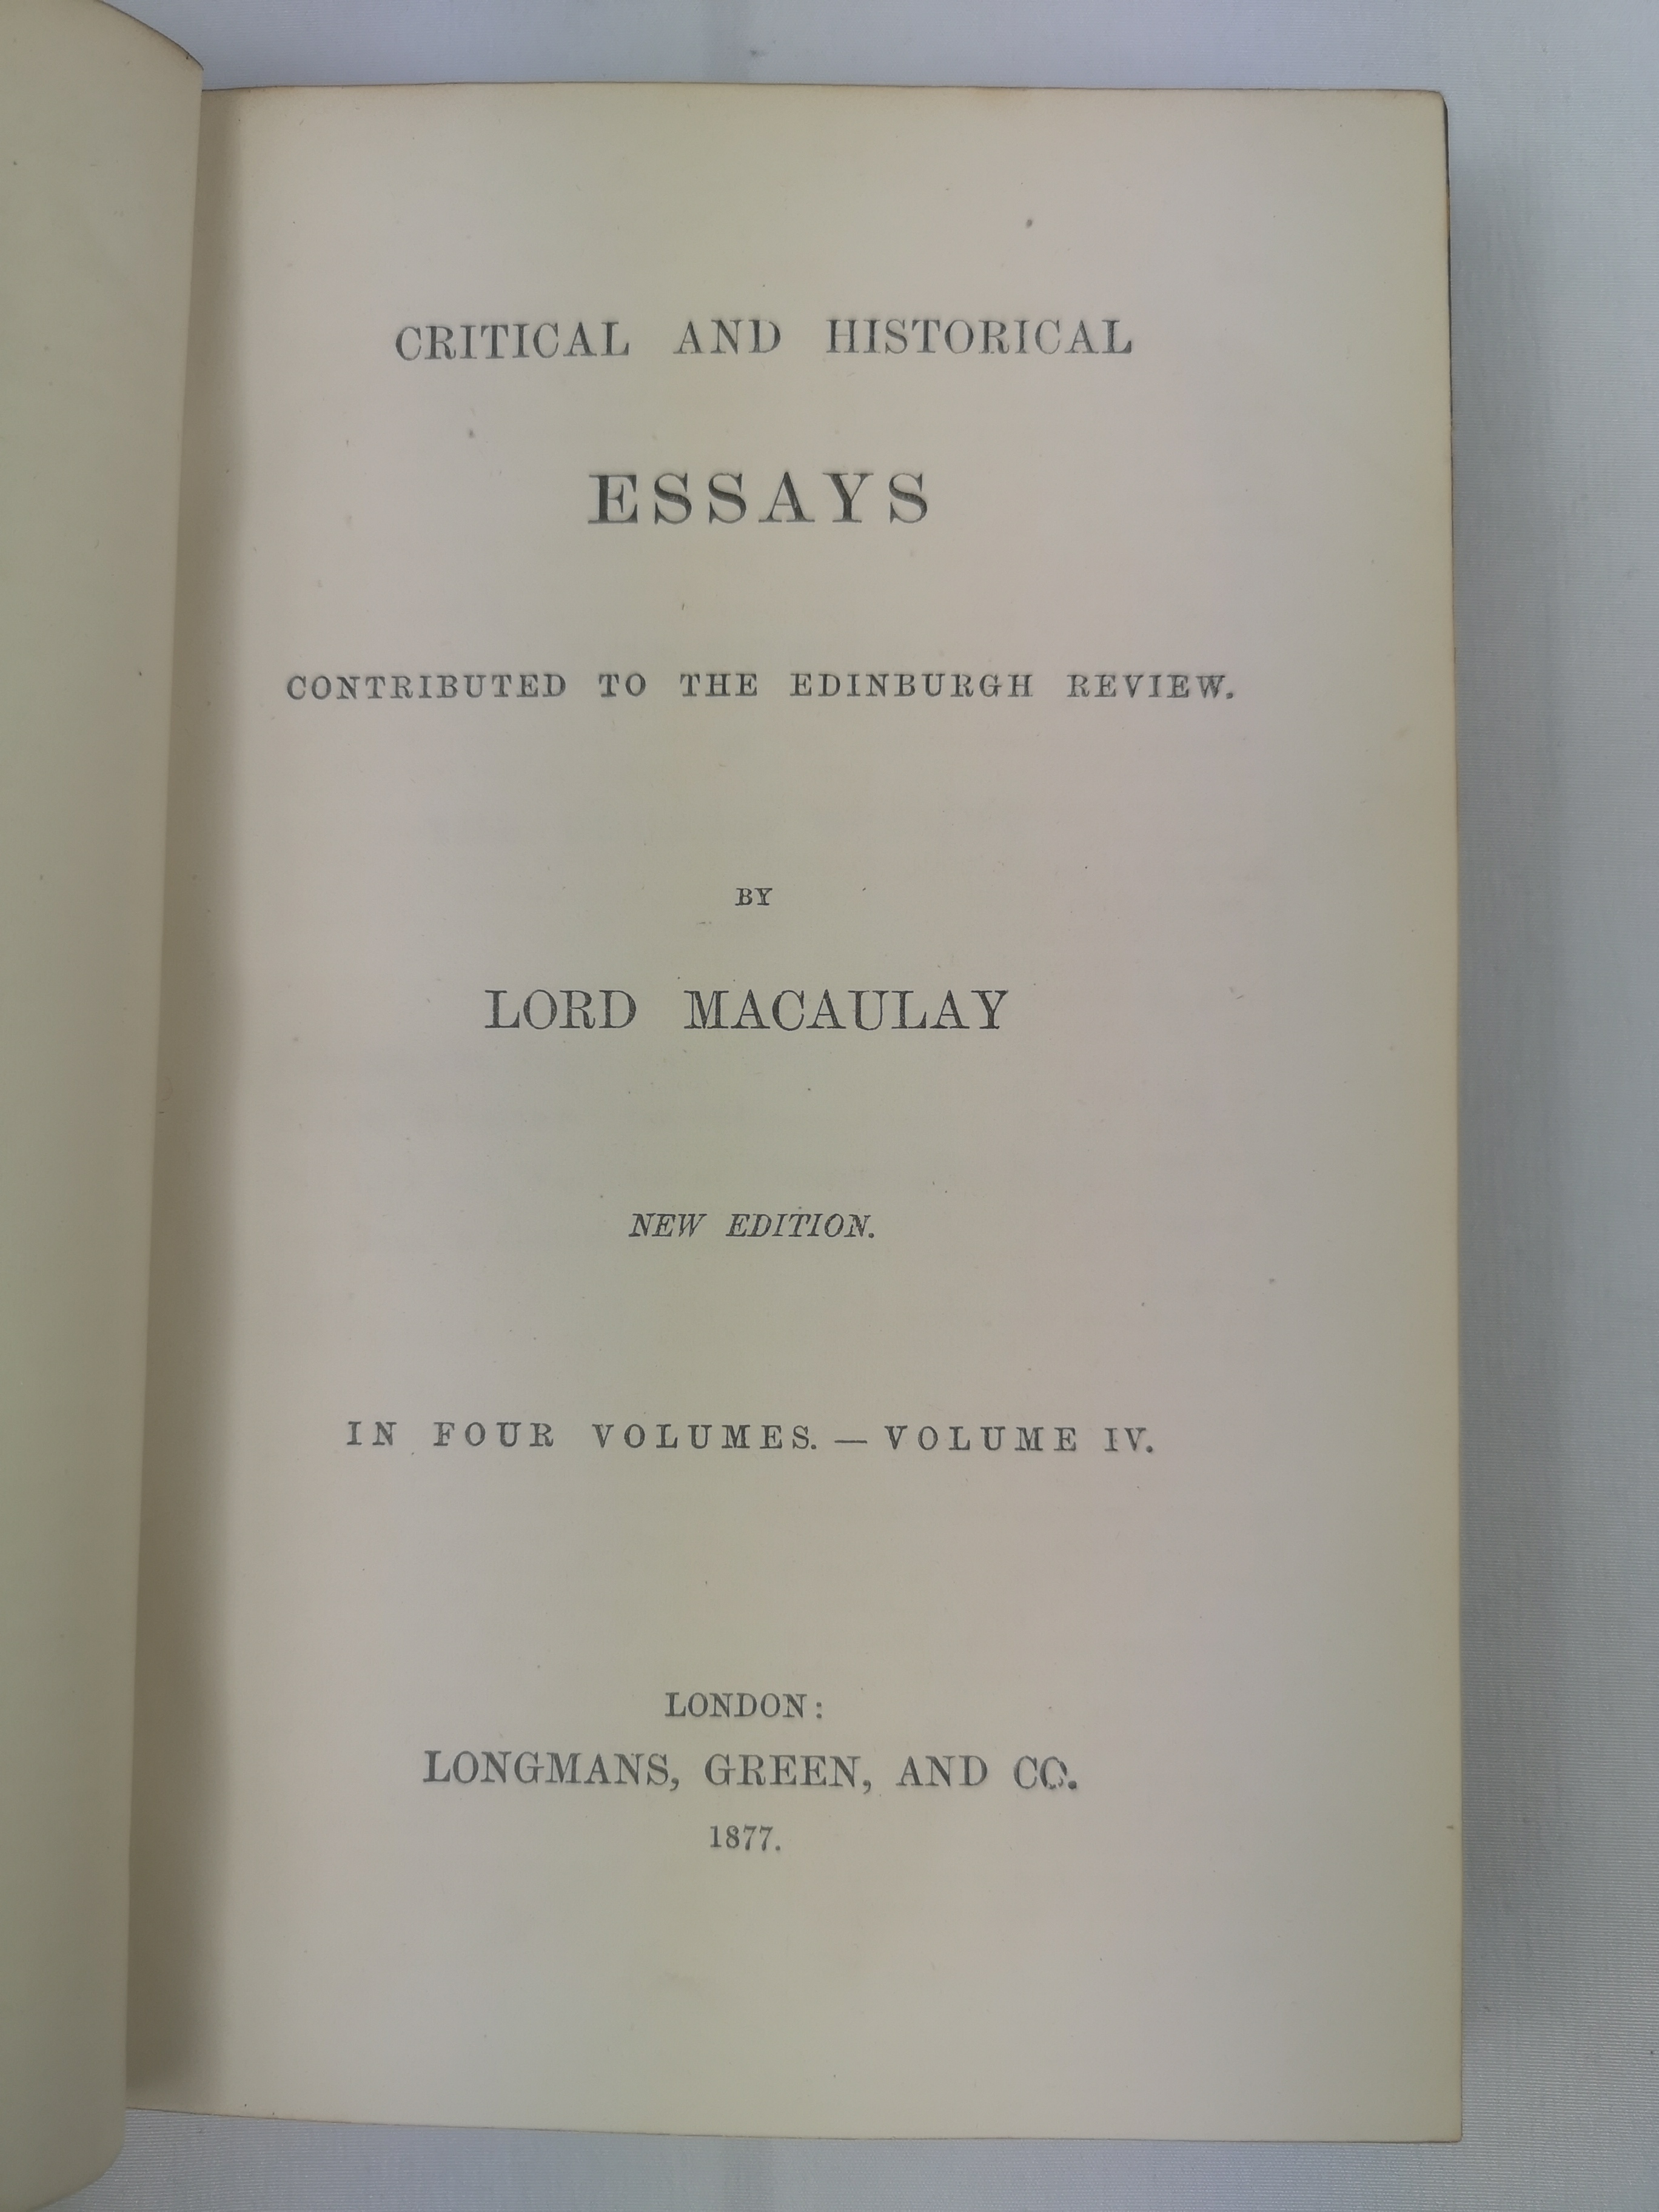 Critical and Historical Essays by Lord Macaulay - Image 2 of 5